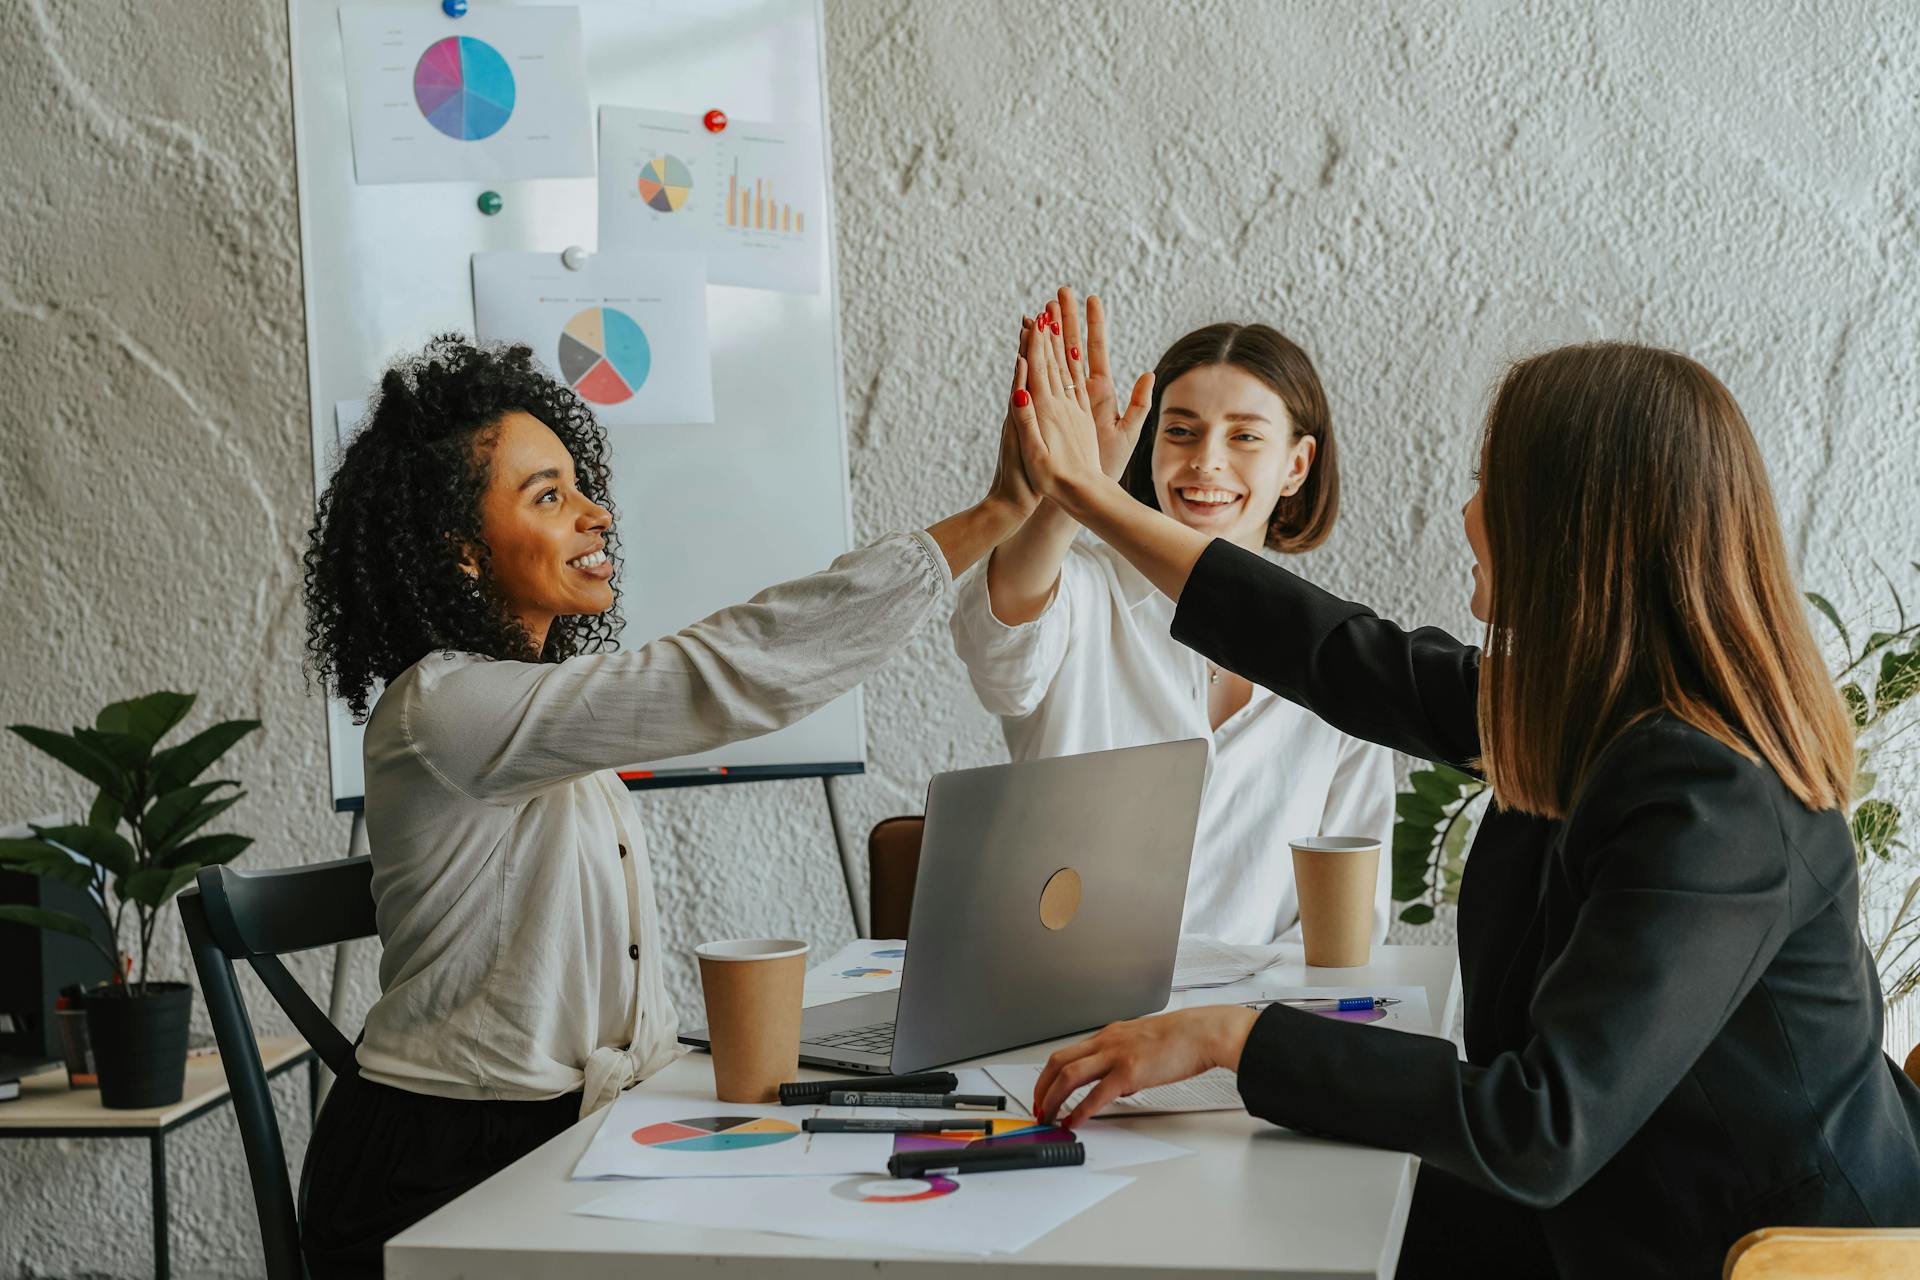 Women colleagues doing a high in the office | Source: Pexels